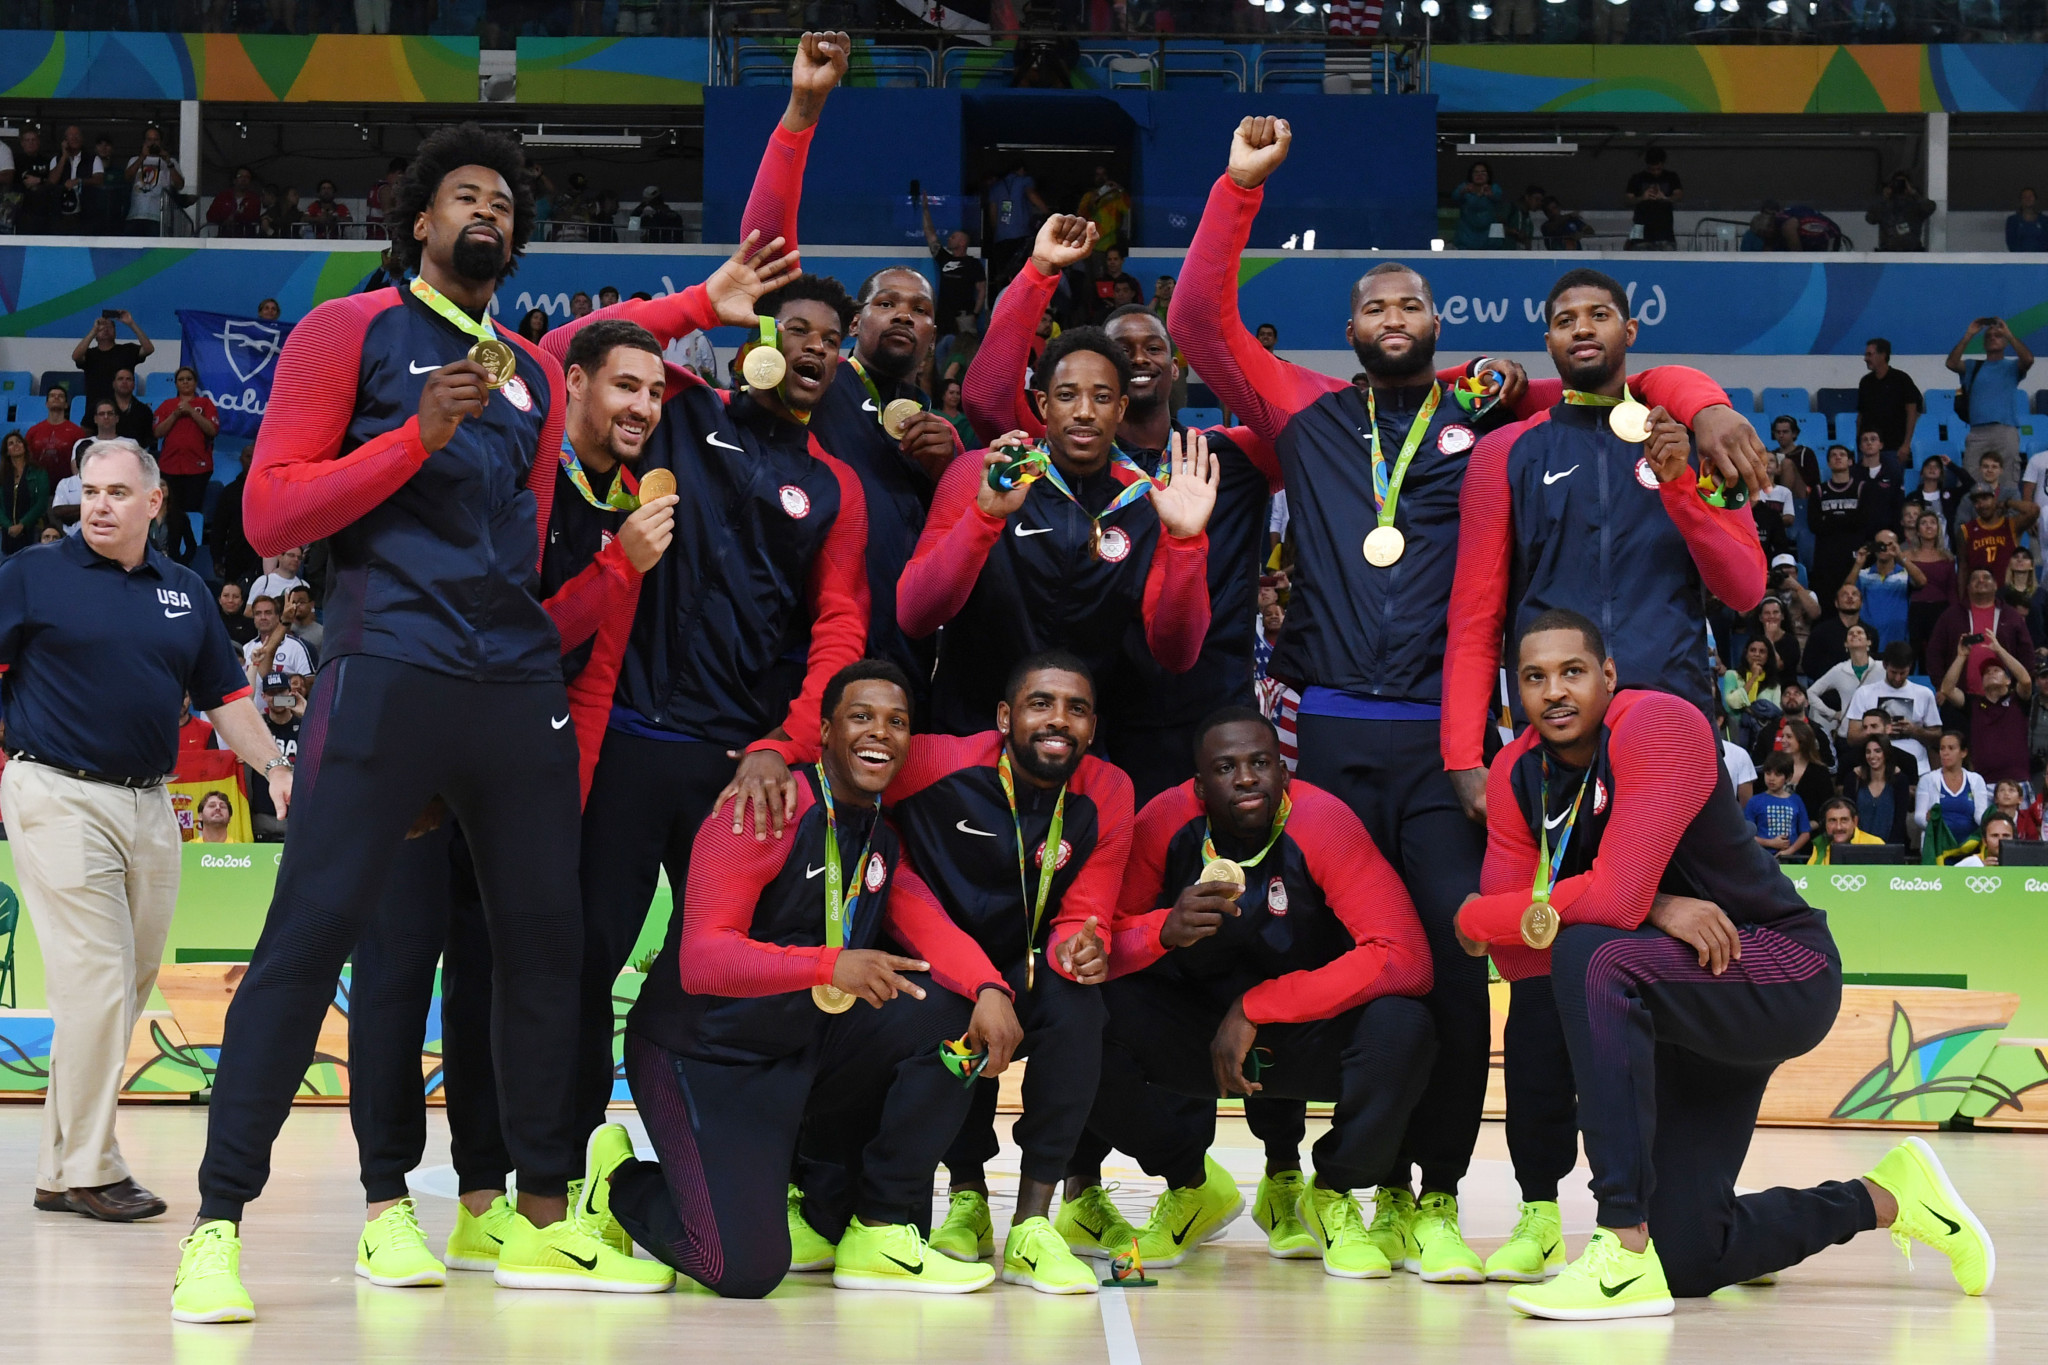 The American men's basketball team will be seeking their fourth consecutive Olympic title in Tokyo ©Getty Images